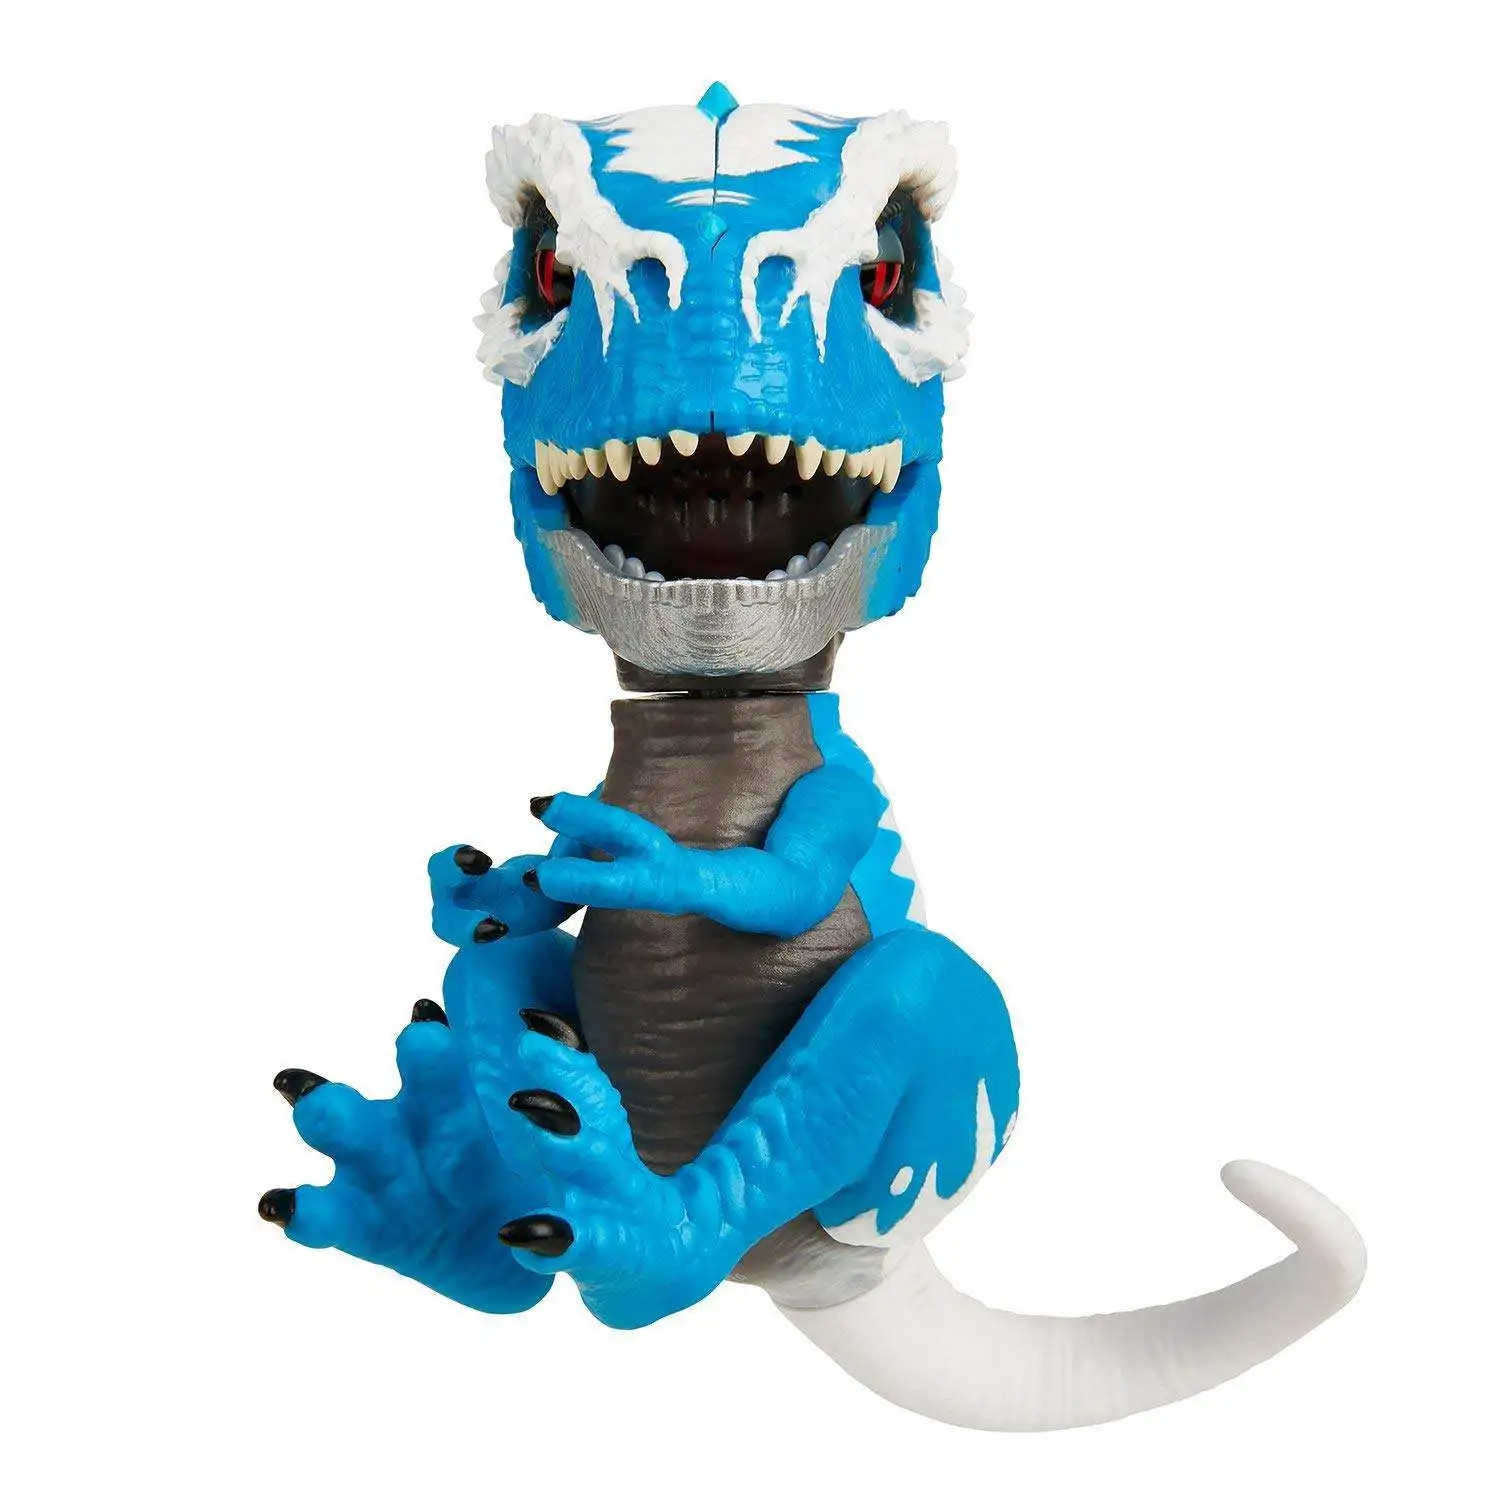 UNTAMED T-REX BY FINGERLINGS IRONJAW BLUE - INTERACTIVE COLLECTIBLE DINOSAUR 